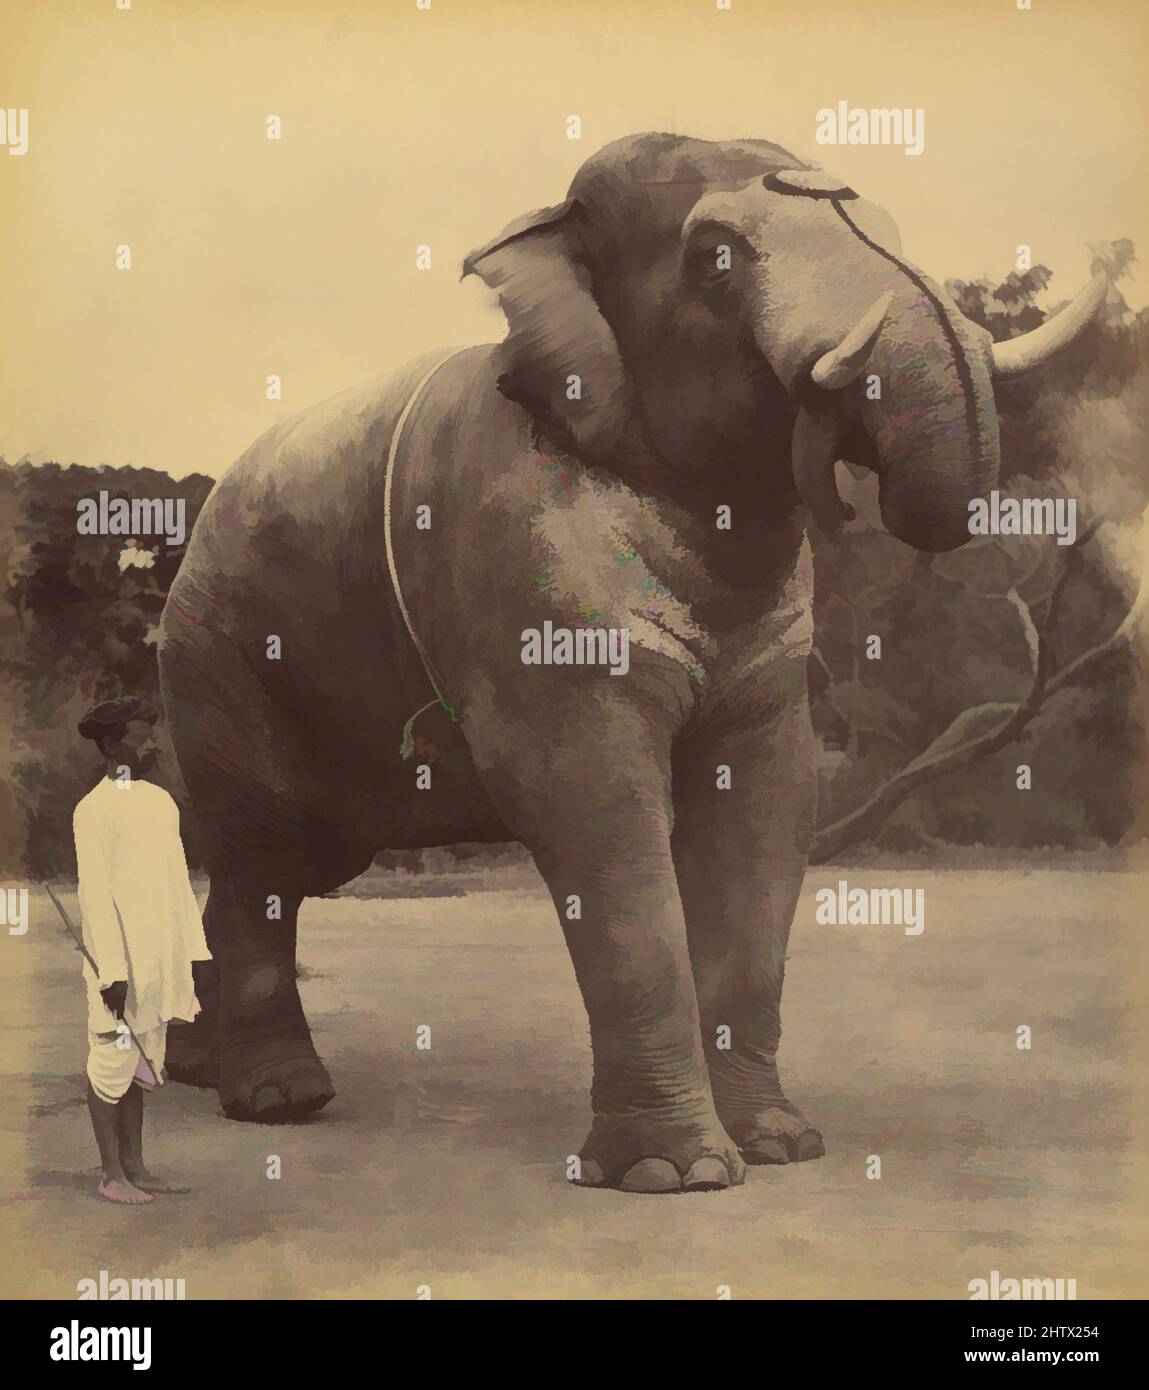 Art inspired by The Great Elephant, 1885–1900, Albumen silver print from glass negative, Image: 24.1 x 21.2 cm (9 1/2 x 8 3/8 in.), Photographs, Lala Deen Dayal (Indian, Sardhana 1844–1905, Classic works modernized by Artotop with a splash of modernity. Shapes, color and value, eye-catching visual impact on art. Emotions through freedom of artworks in a contemporary way. A timeless message pursuing a wildly creative new direction. Artists turning to the digital medium and creating the Artotop NFT Stock Photo